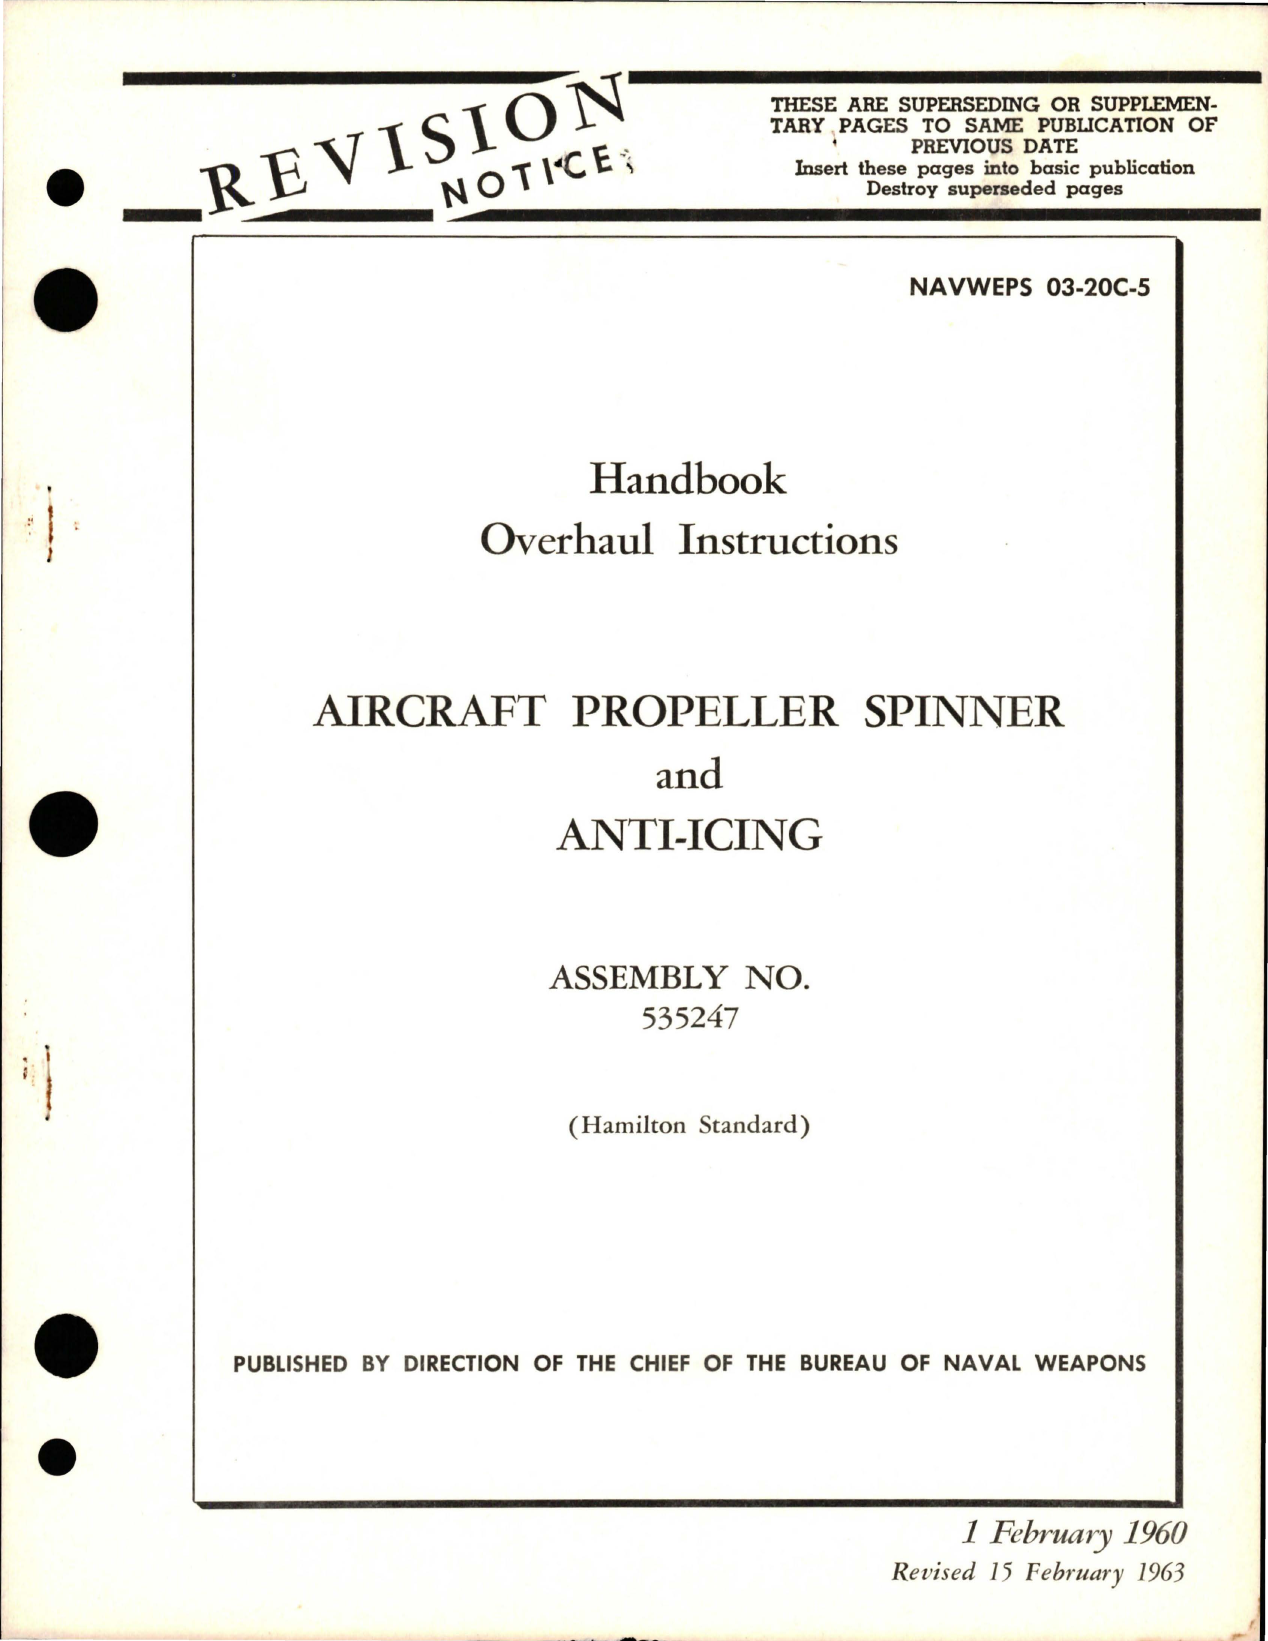 Sample page 1 from AirCorps Library document: Overhaul Instructions for Aircraft Propeller Spinner and Anti-Icing - Assembly 535247